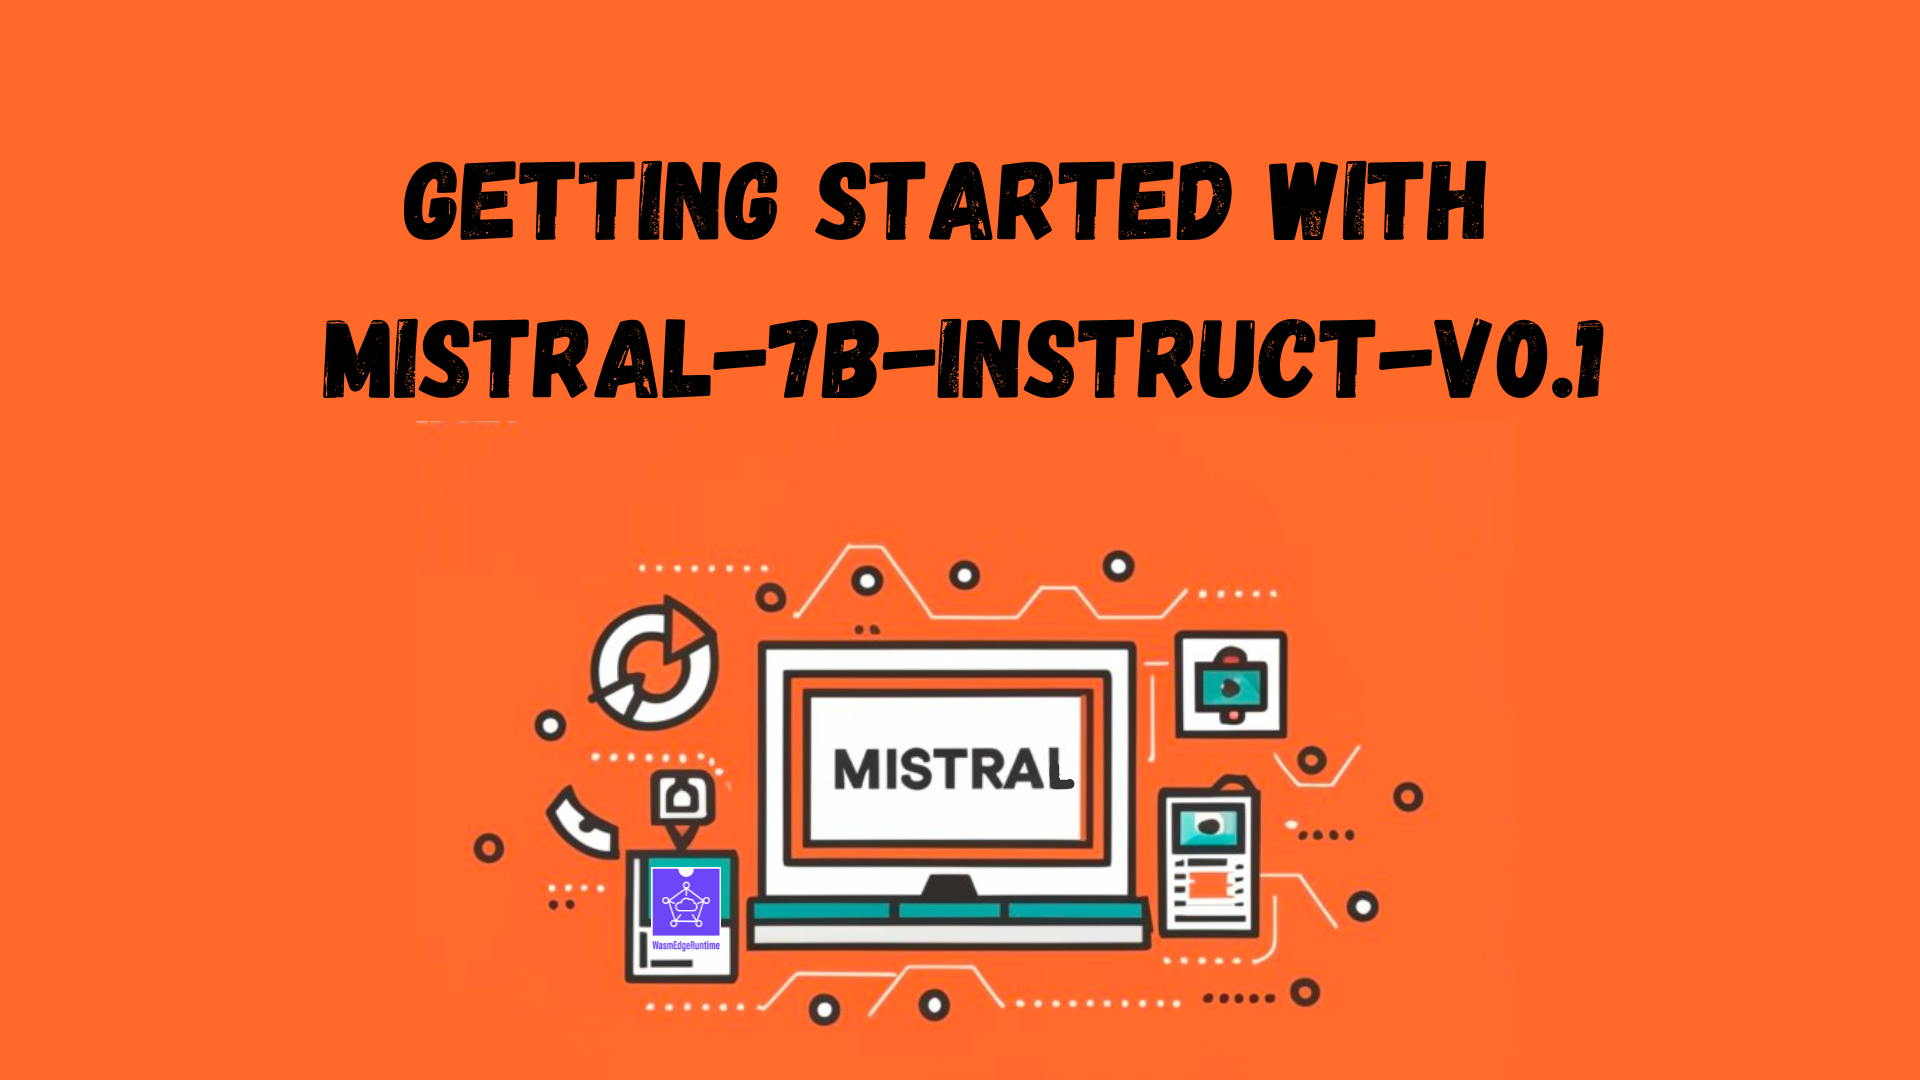 The mistral-7b-instruct-v0.1 model is a 7B instruction-tuned LLM released by Mistral AI. It is a true open source model licensed under Apache 2.0. It 